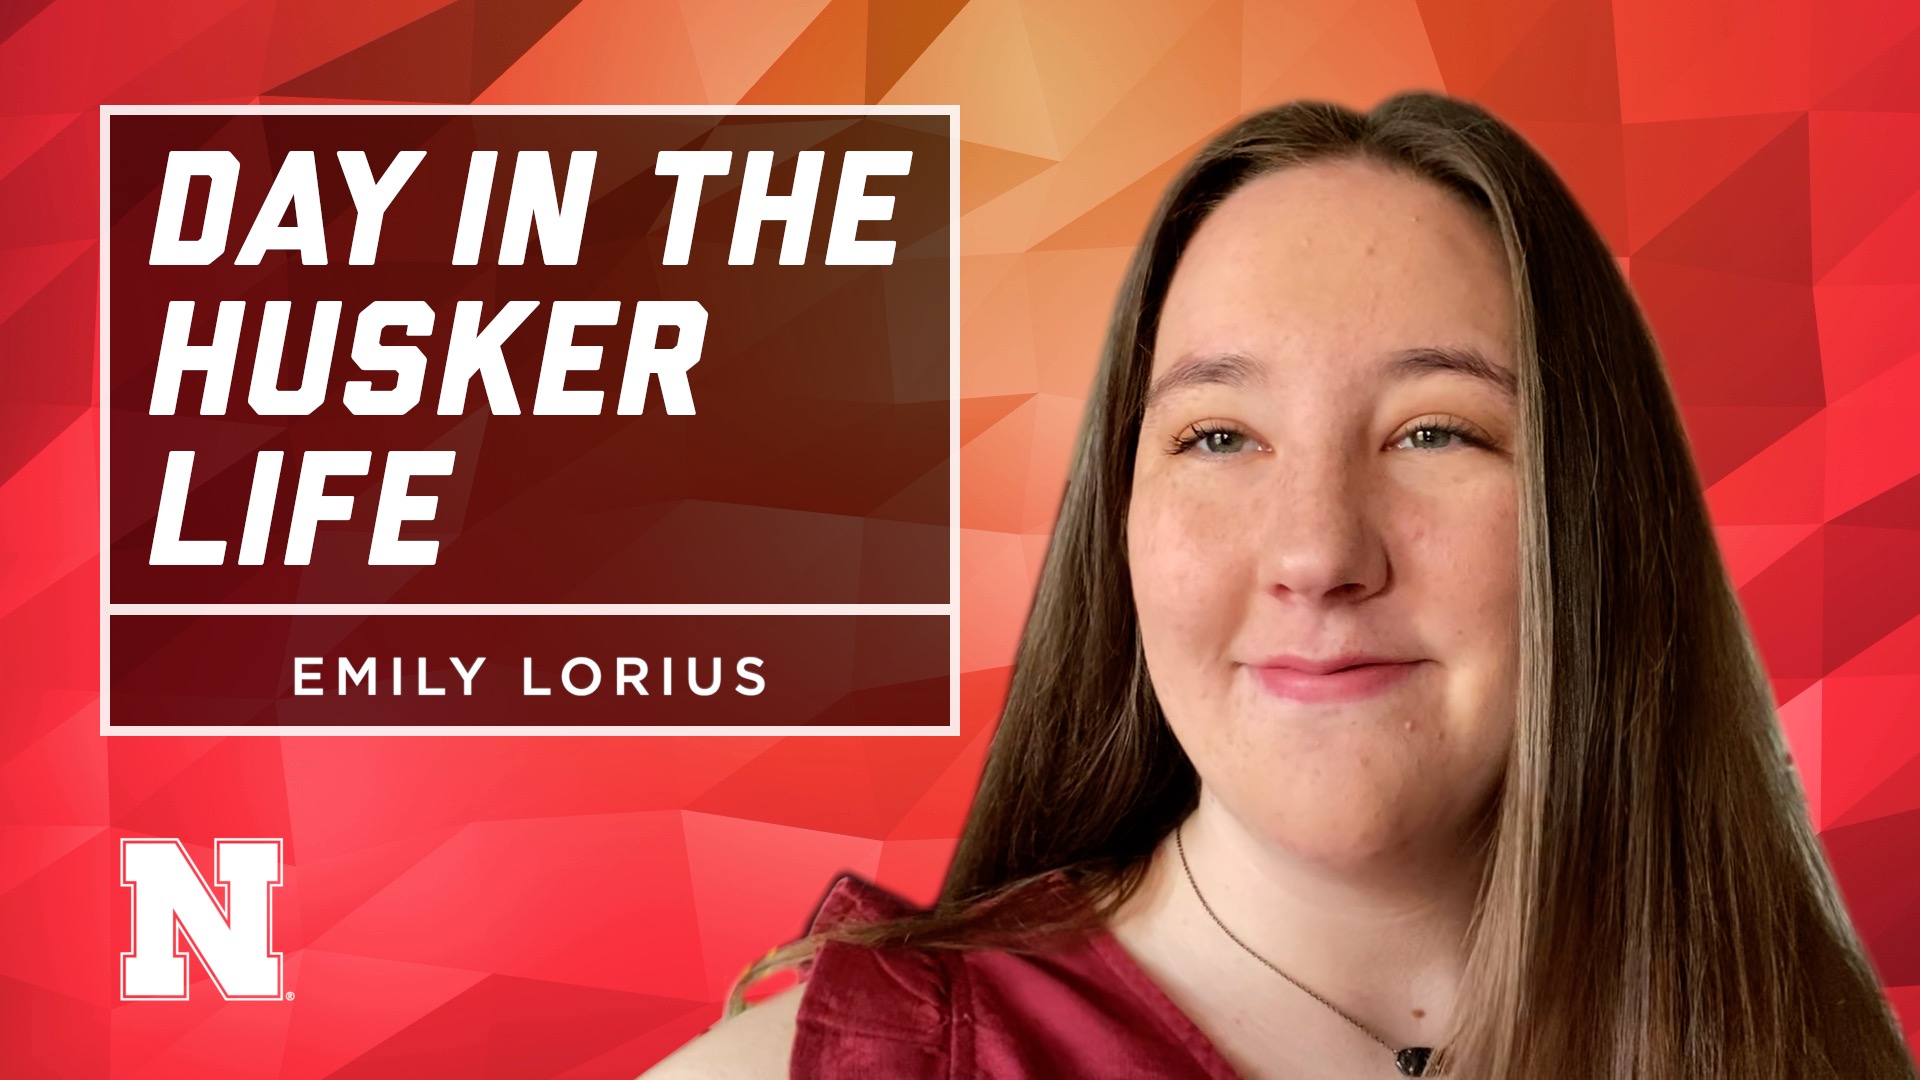 Day in the Husker Life: Emily Lorius